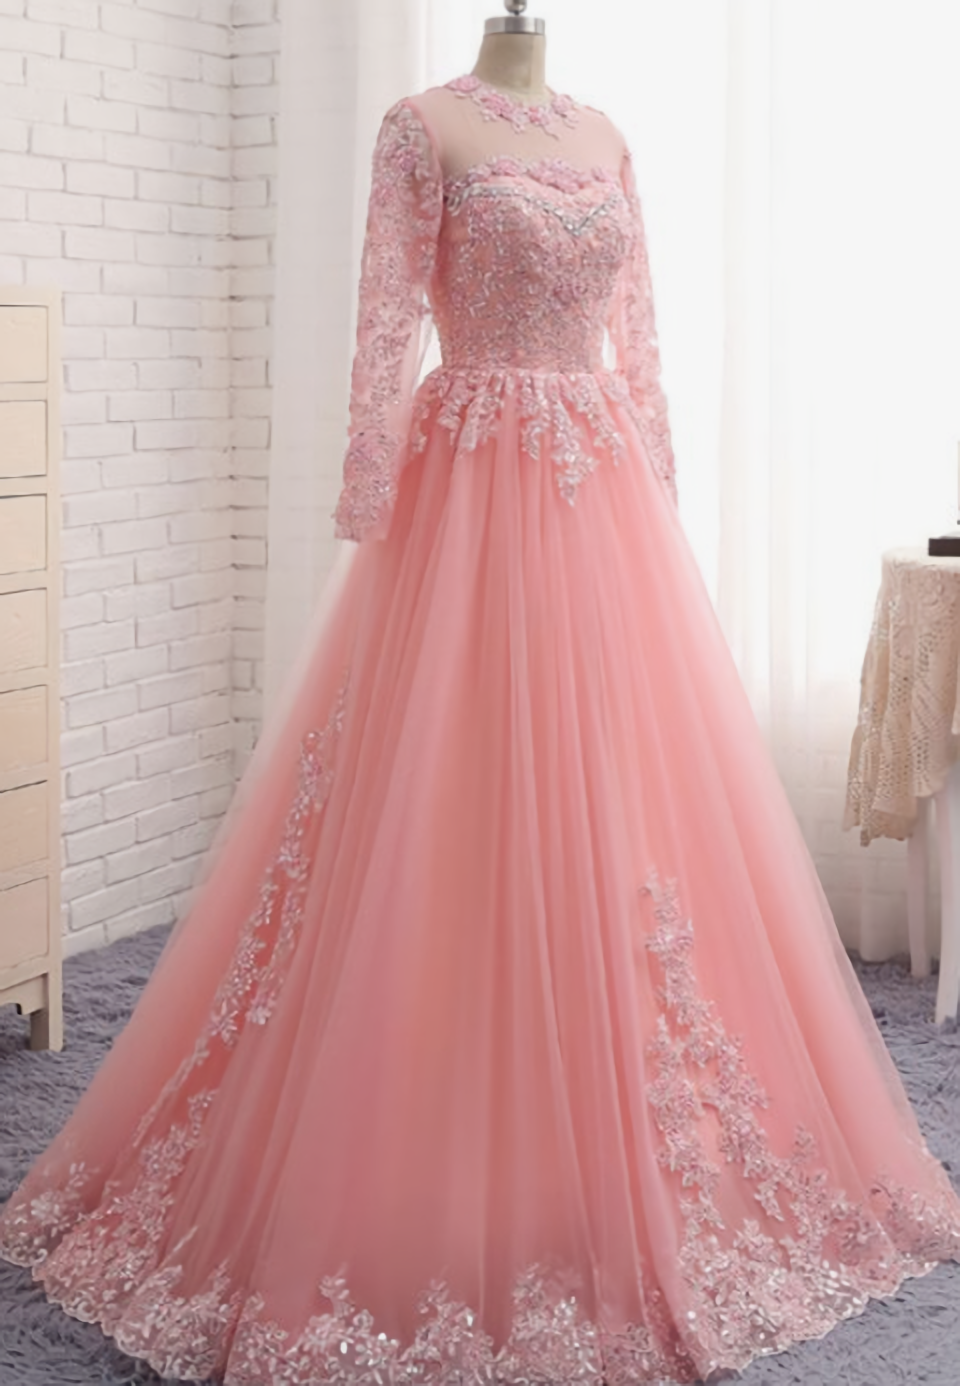 Homecoming Dresses Blues, Charming Long Sleeve Appliques Pink Tulle Prom Dresses, Elegant Evening Formal Dress